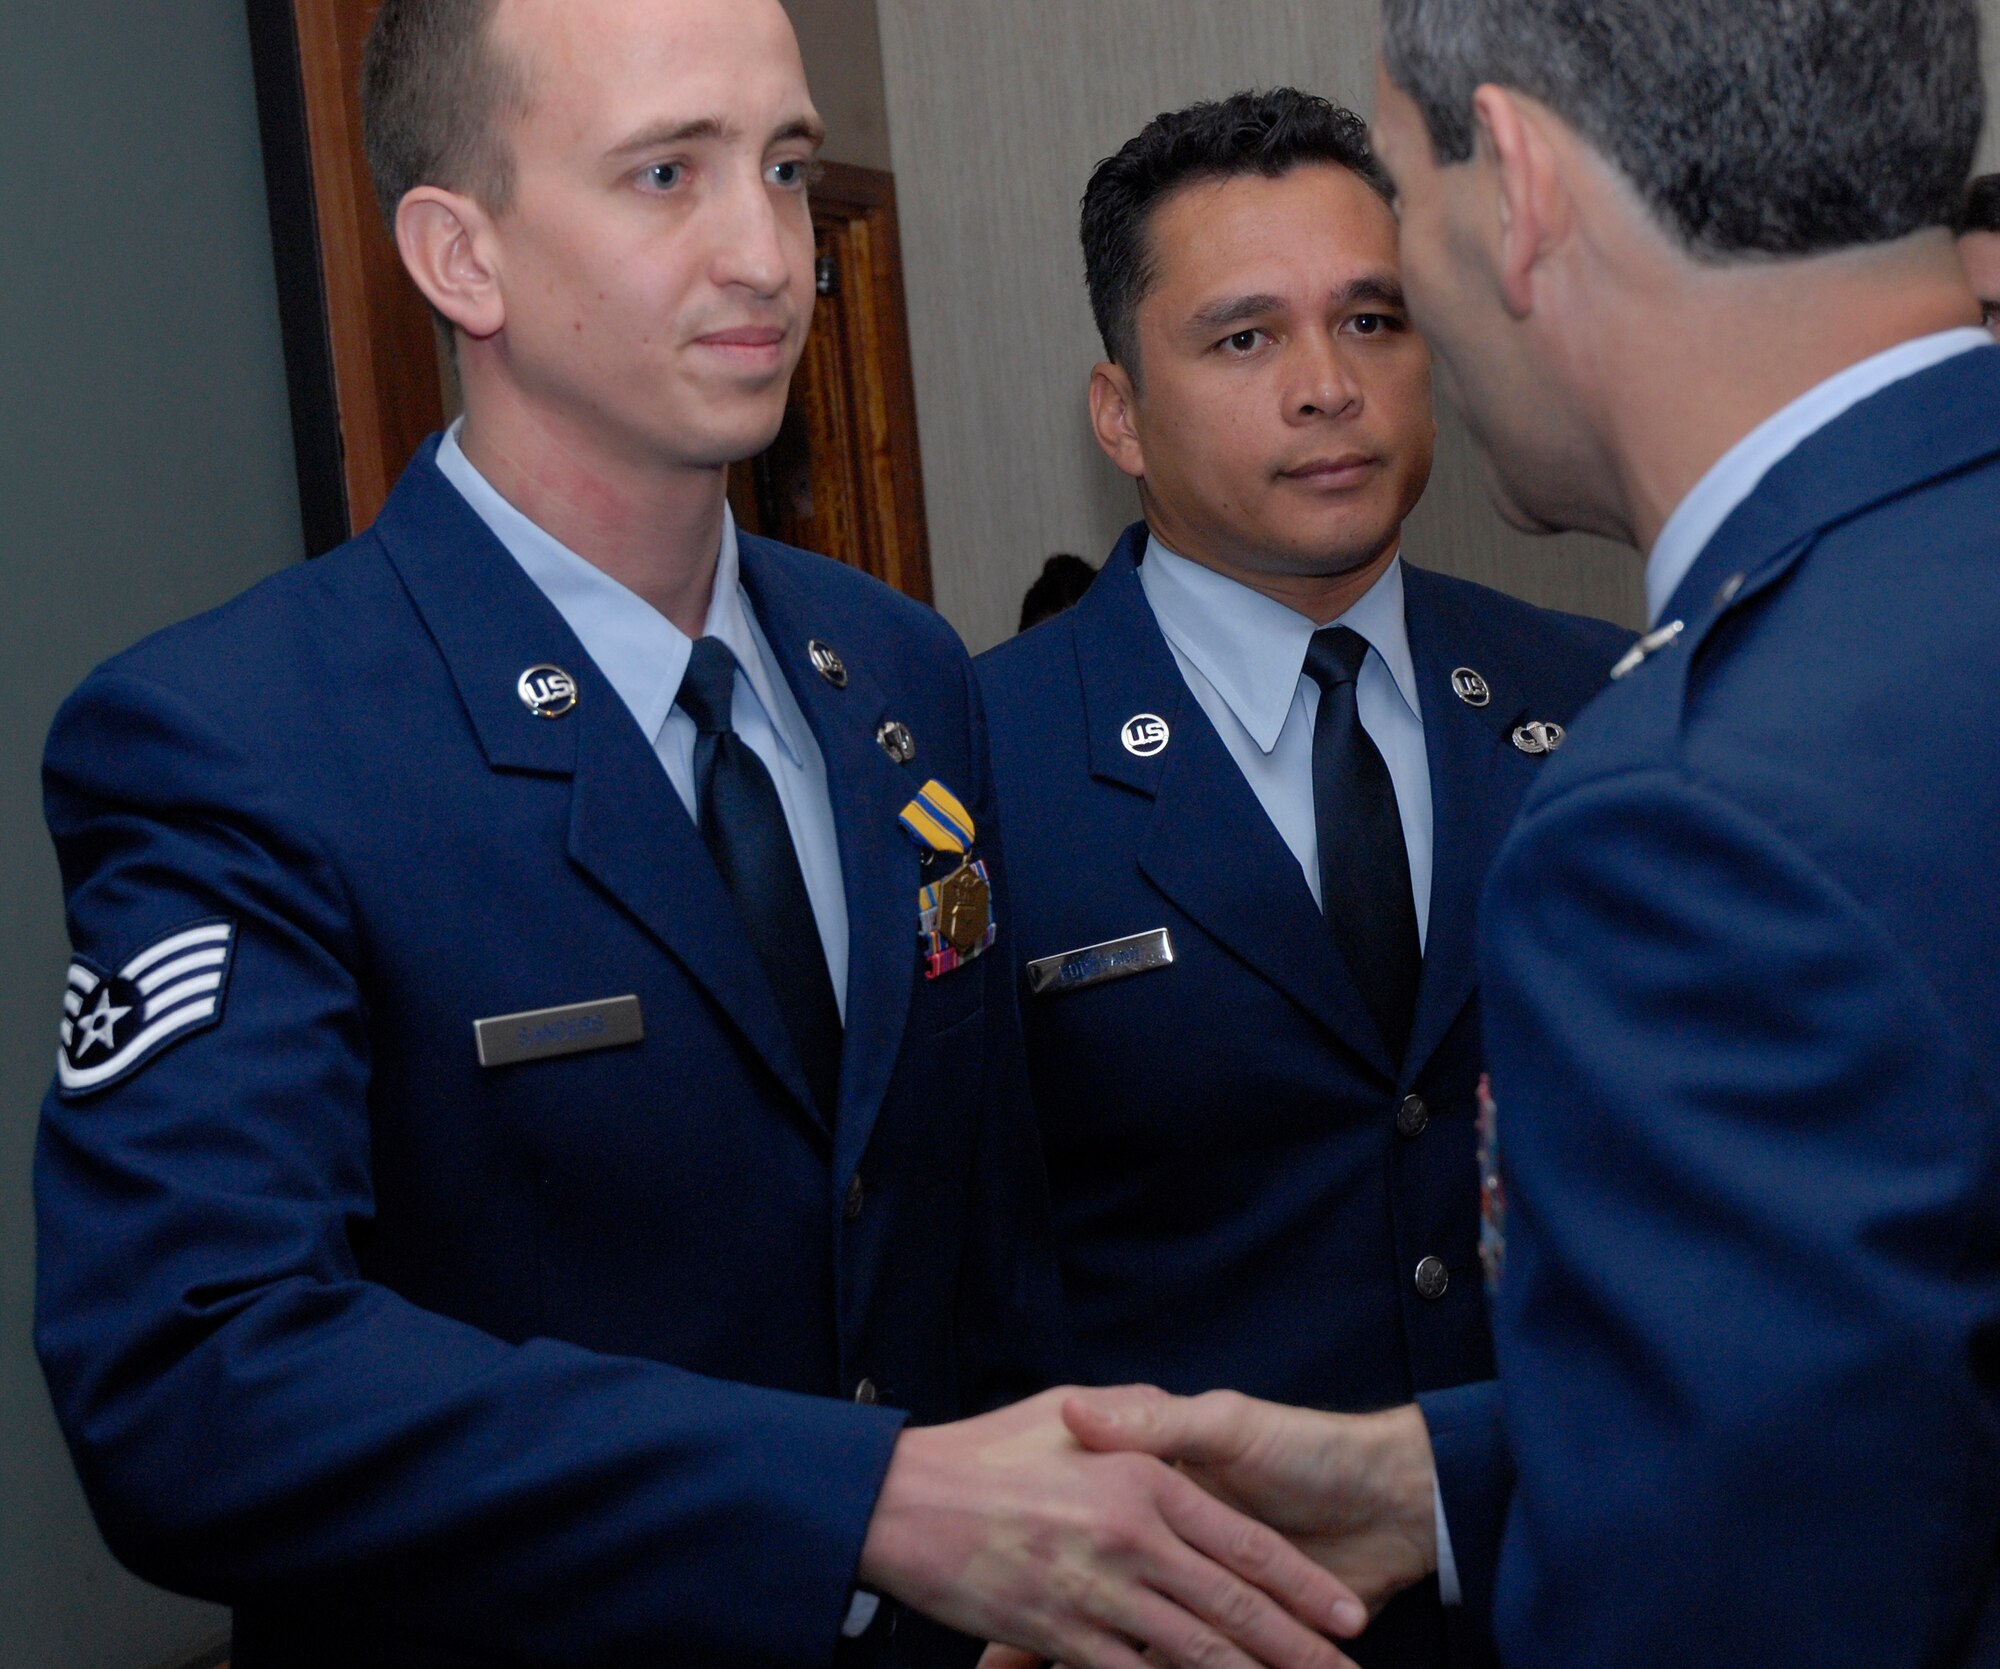 Staff Sgt. Aaron Sanders shakes hands with Brig. Gen. Ken Wilsbach, 18th Wing commander, after receiving the Air Force Commendation Medal for an act of courage April 26. Sergeant Sanders and Staff Sgt. Abraham Forehand (right), from the 353rd Special Operations Group, both received medals for pulling a man pinned under an automobile after an off-base accident March 3. (U.S. Air Force photo / Airman 1st Class Jarvie Wallace)